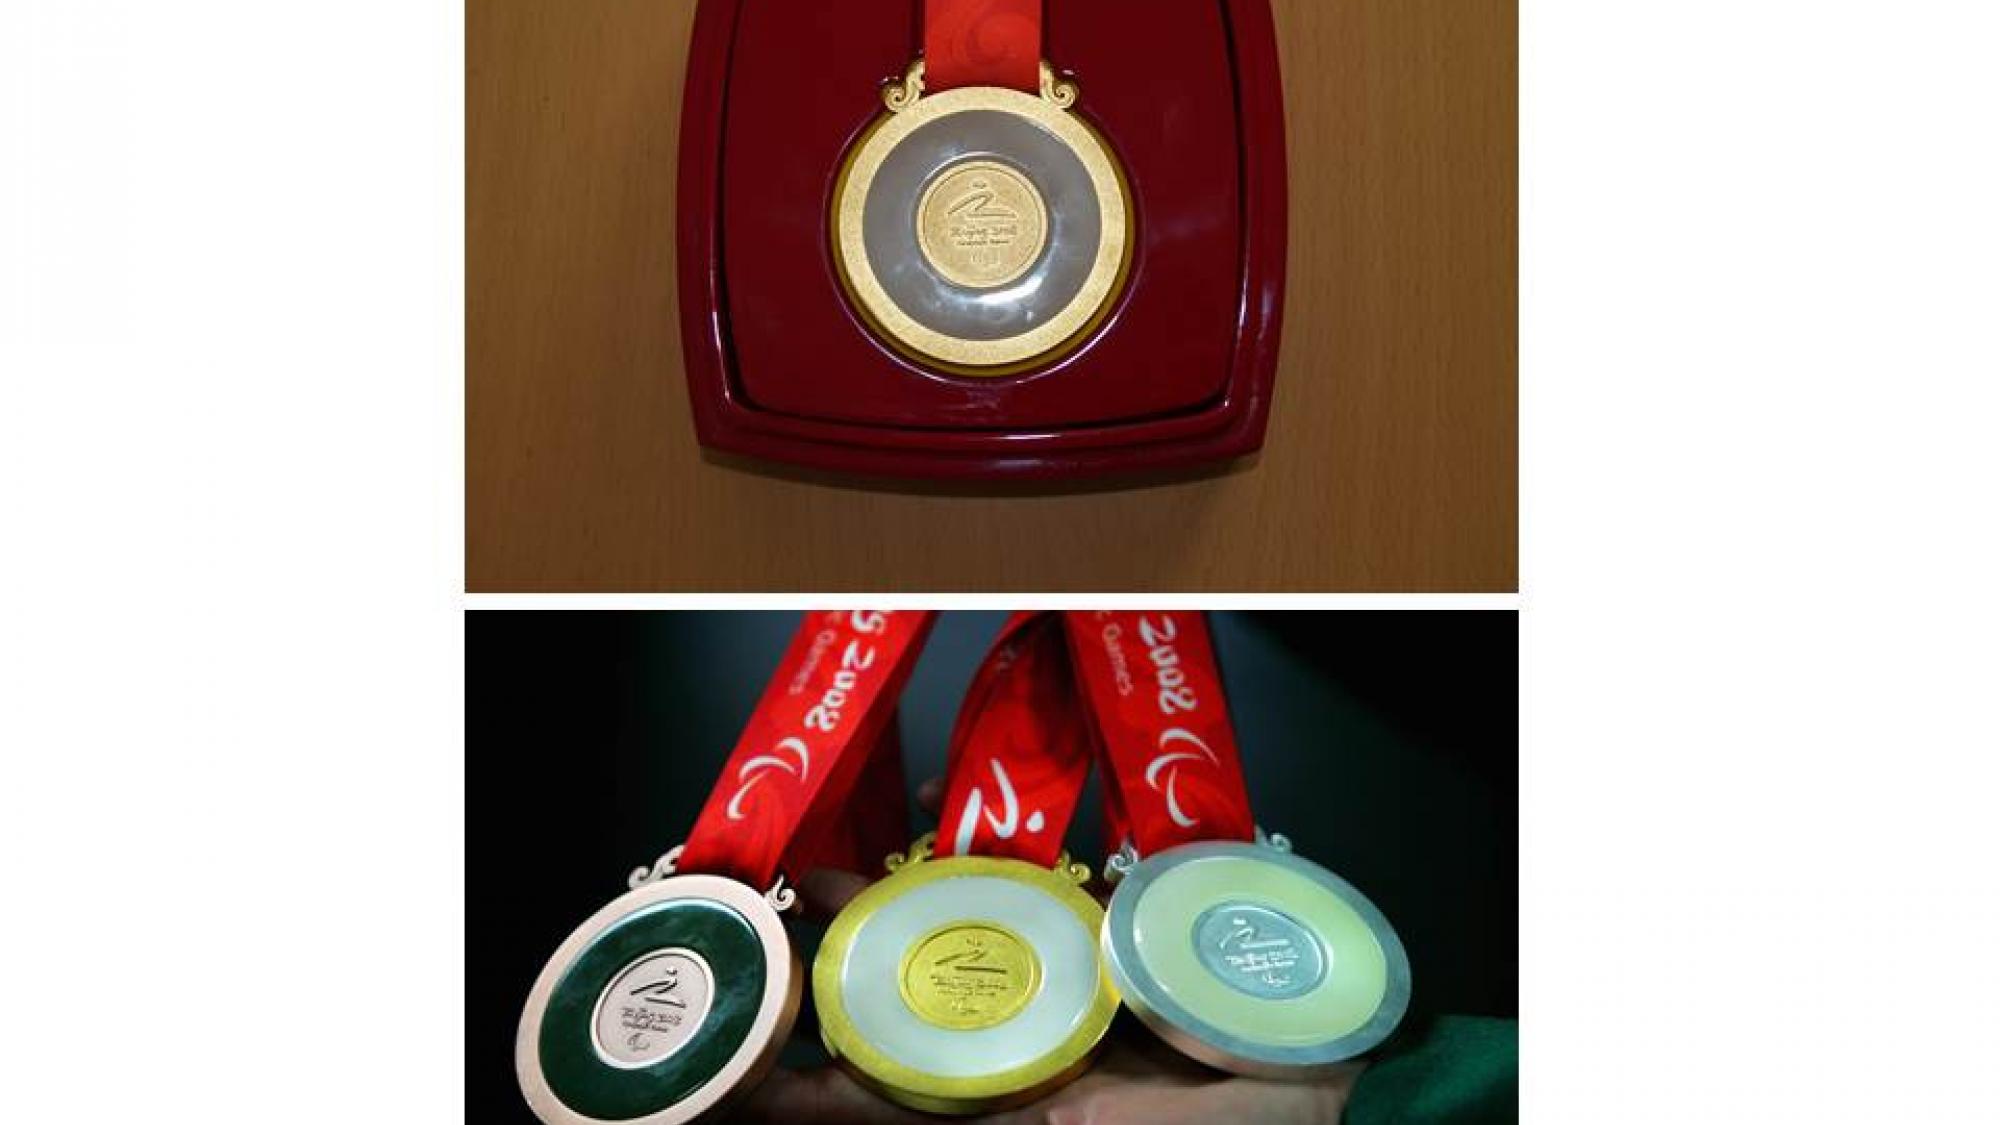 Beijing 2008 Paralympic medals